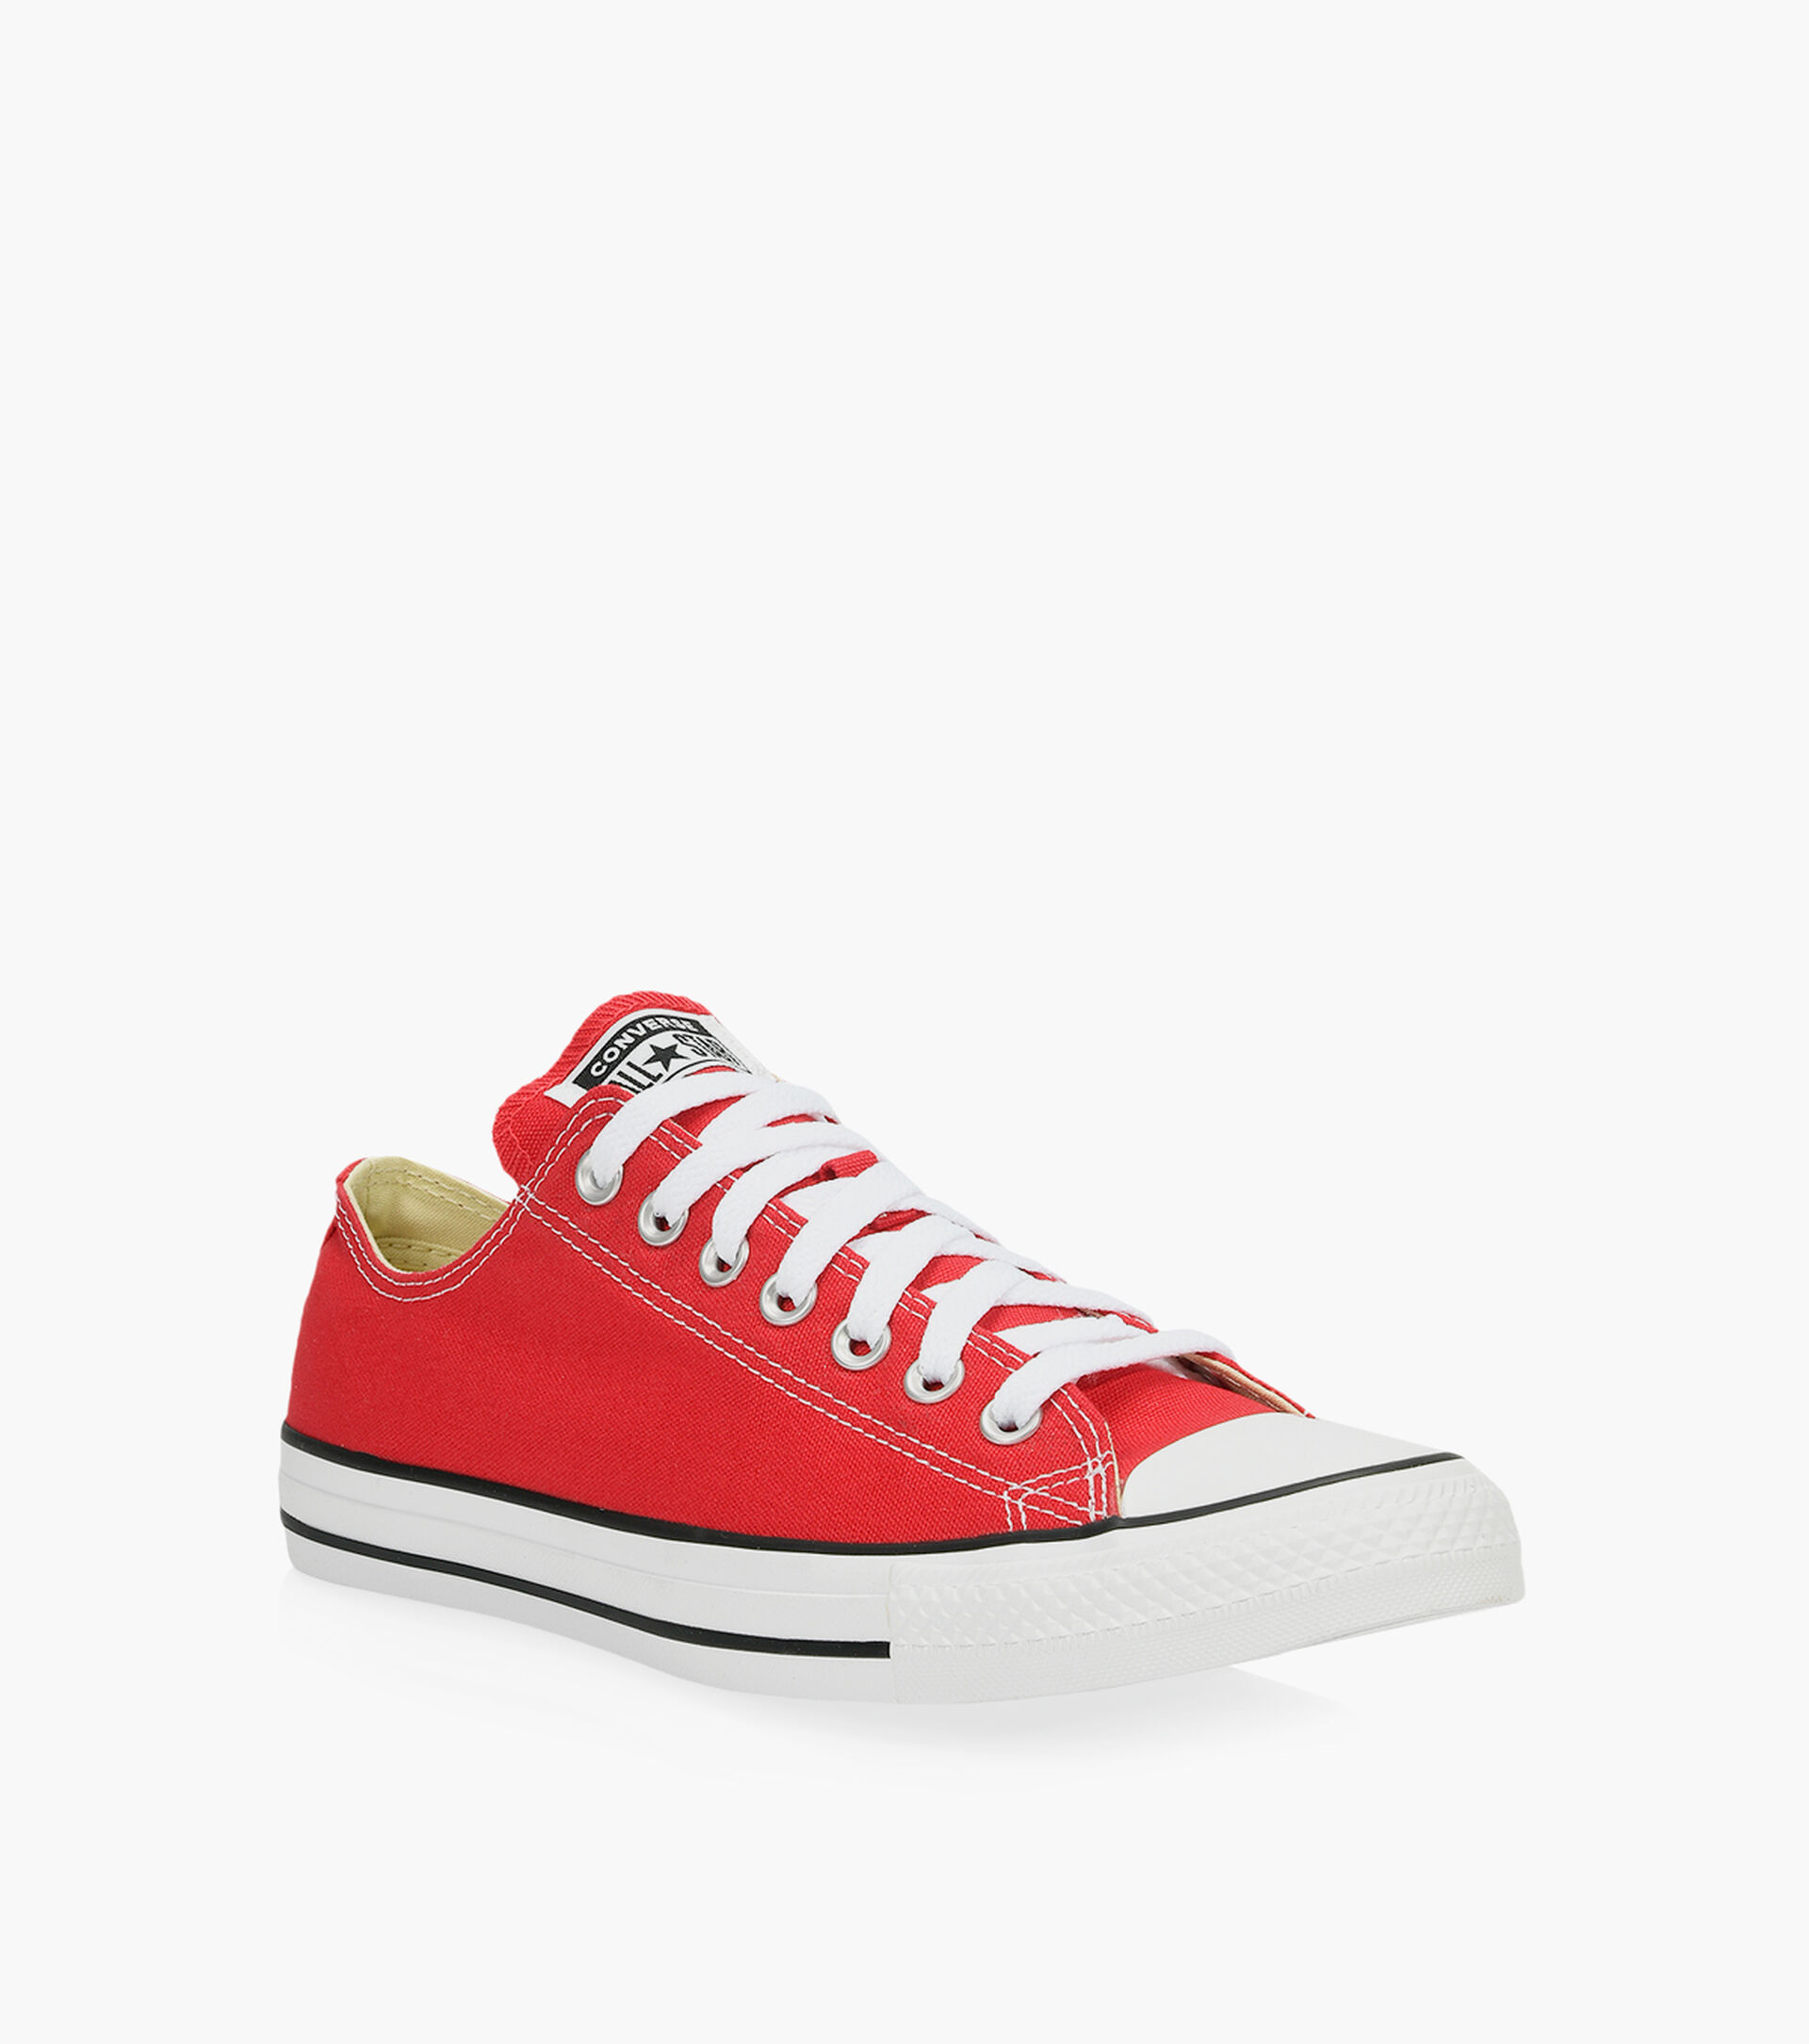 CONVERSE CHUCK TAYLOR ALL STAR LOW TOP | Browns Shoes